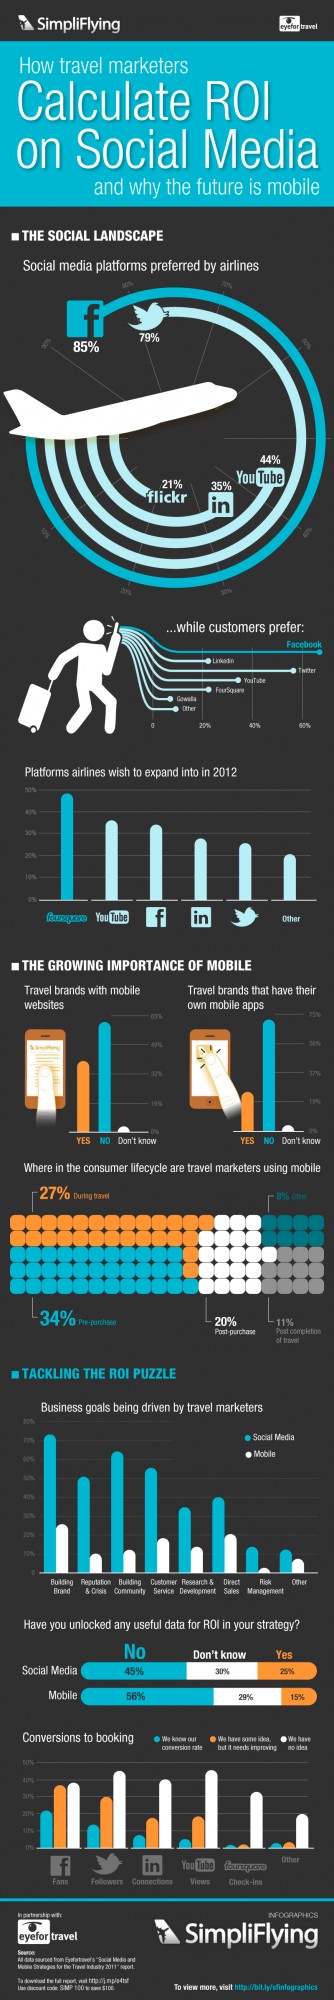 Infographic: ROI of Social Media in the Travel Industry